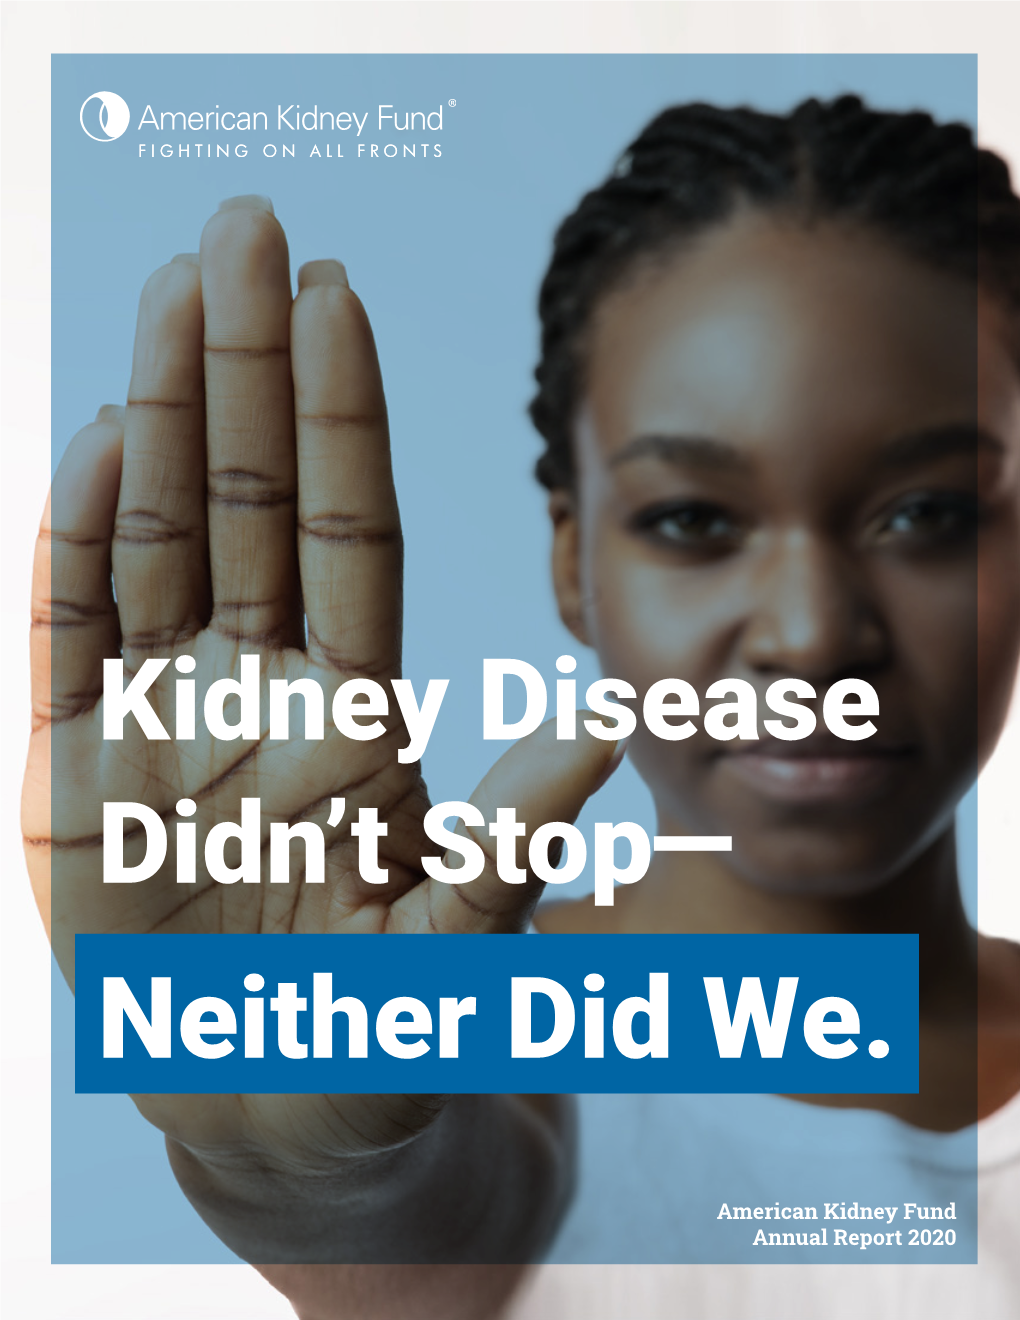 American Kidney Fund Annual Report 2020